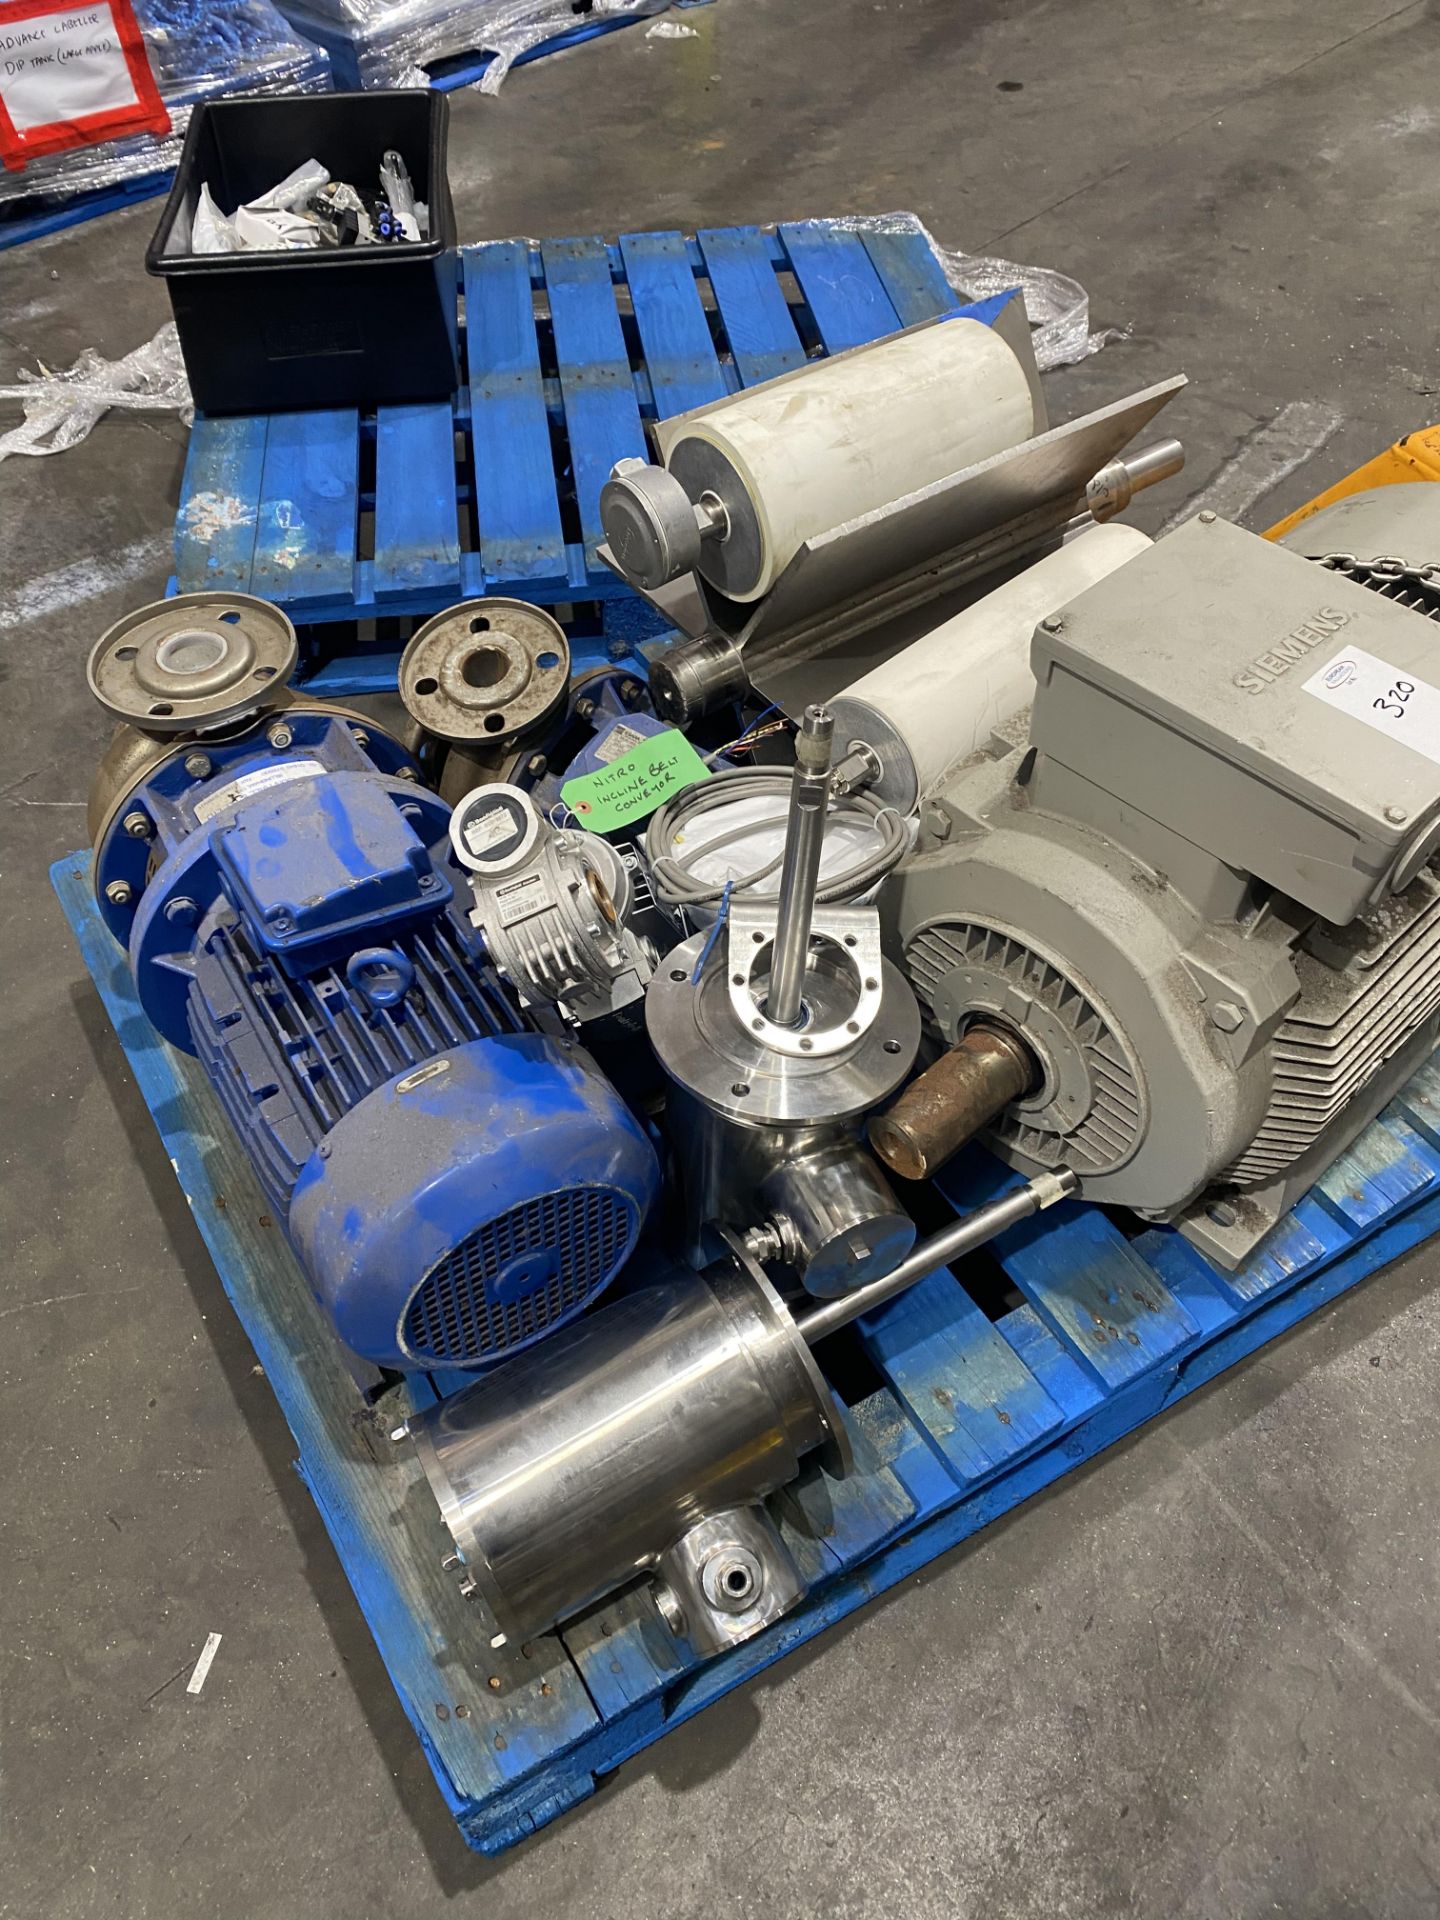 Contents of pallet to include 6 various electric m